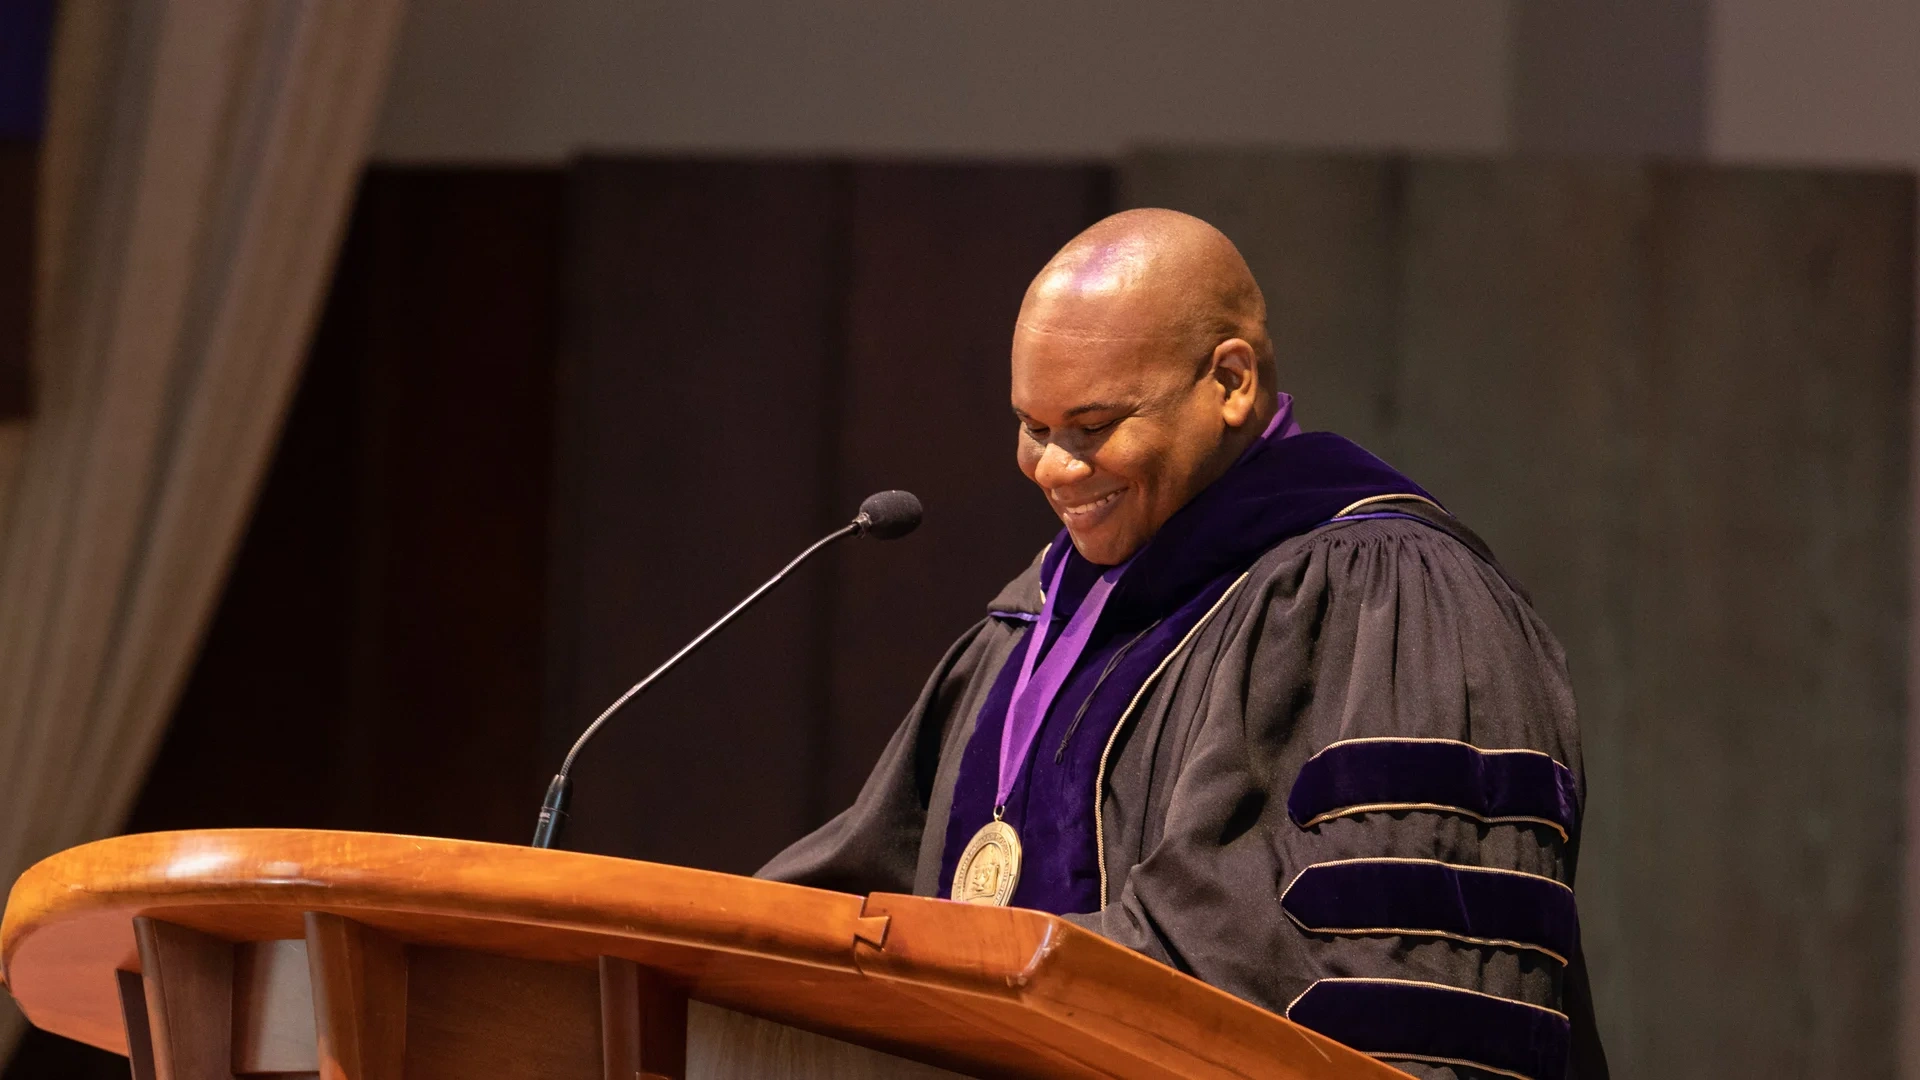 Houghton president, Wayne Lewis standing at behind lectern at commencement address.